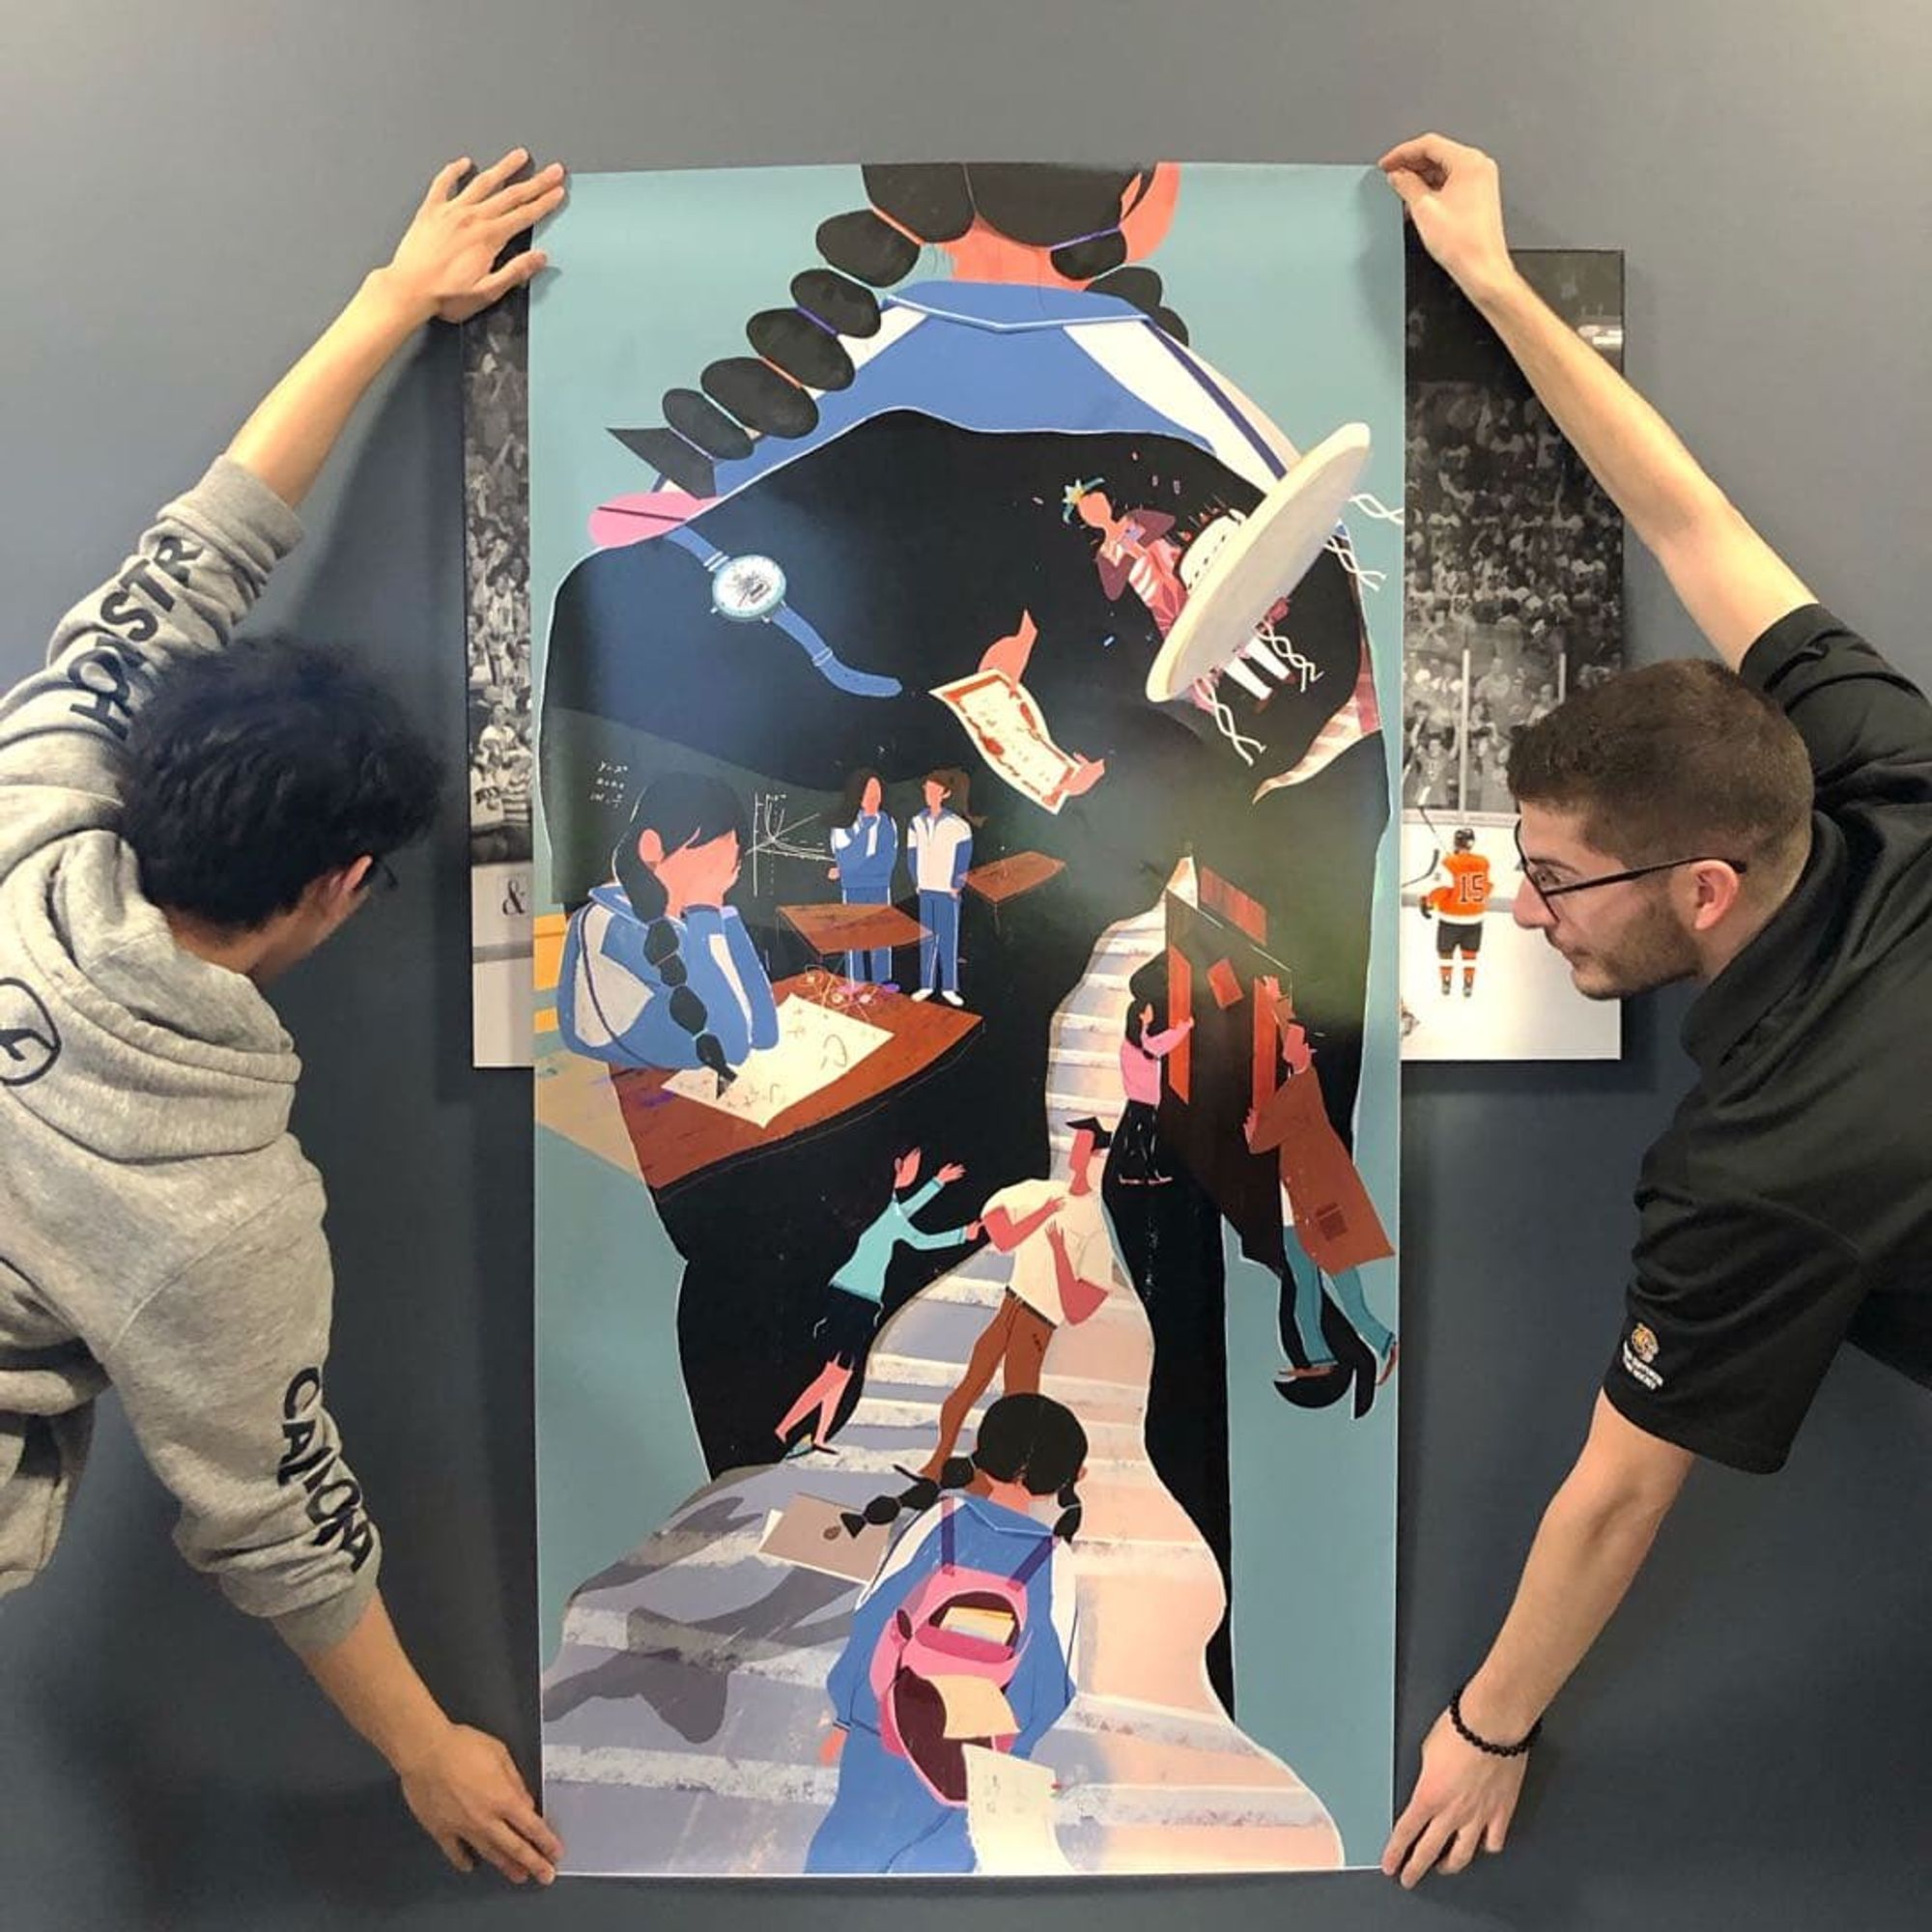 Testing the size of the poster